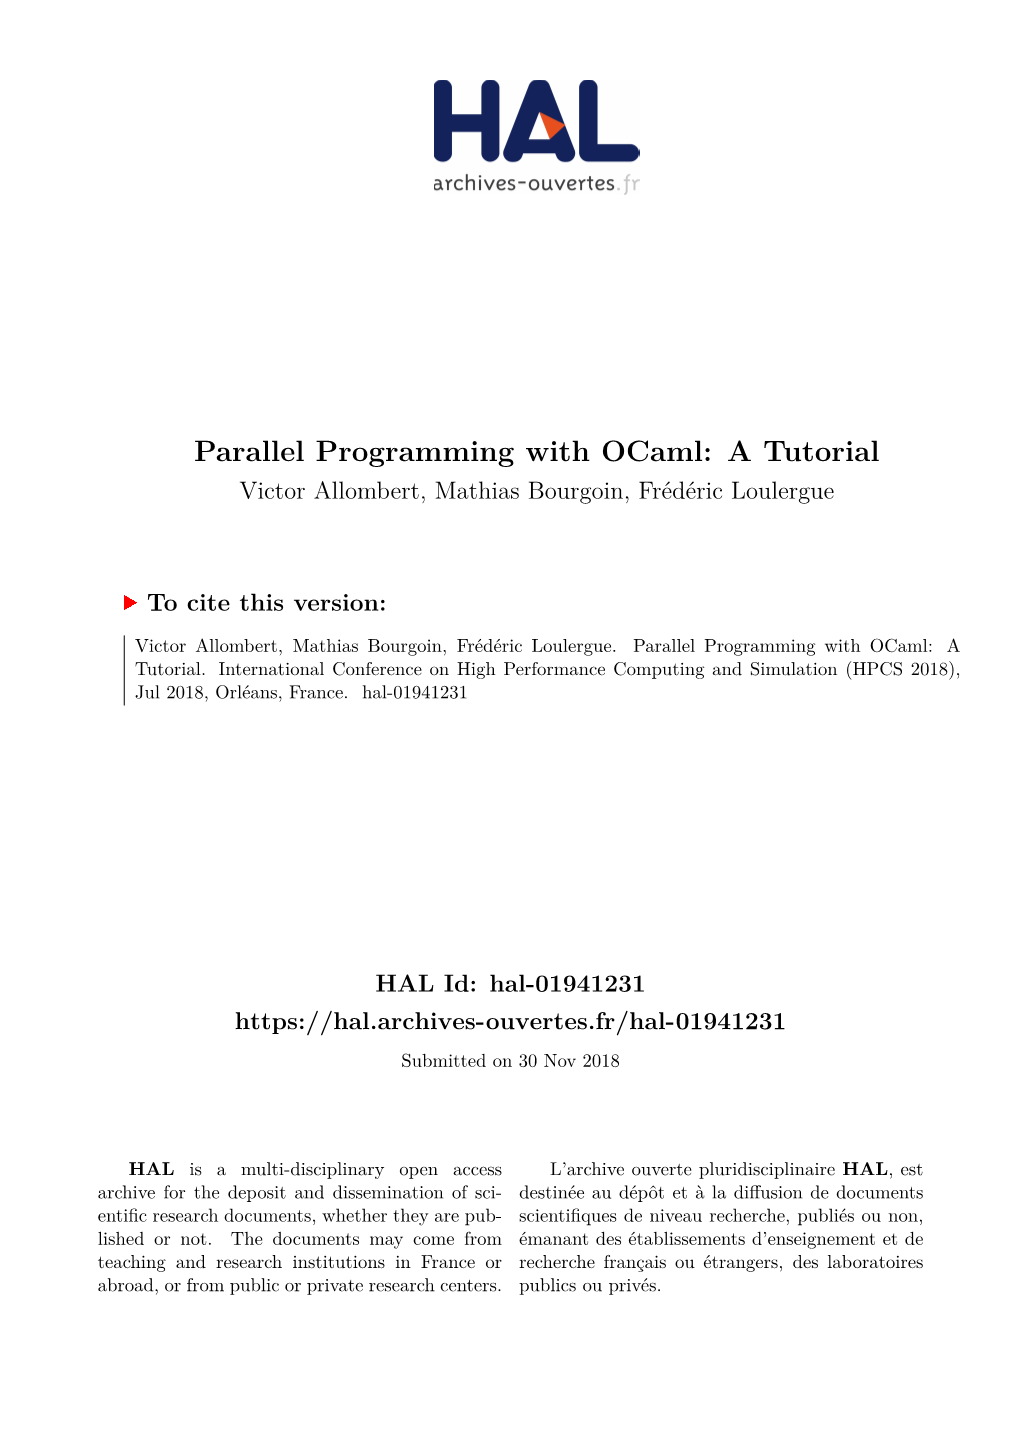 Parallel Programming with Ocaml: a Tutorial Victor Allombert, Mathias Bourgoin, Frédéric Loulergue